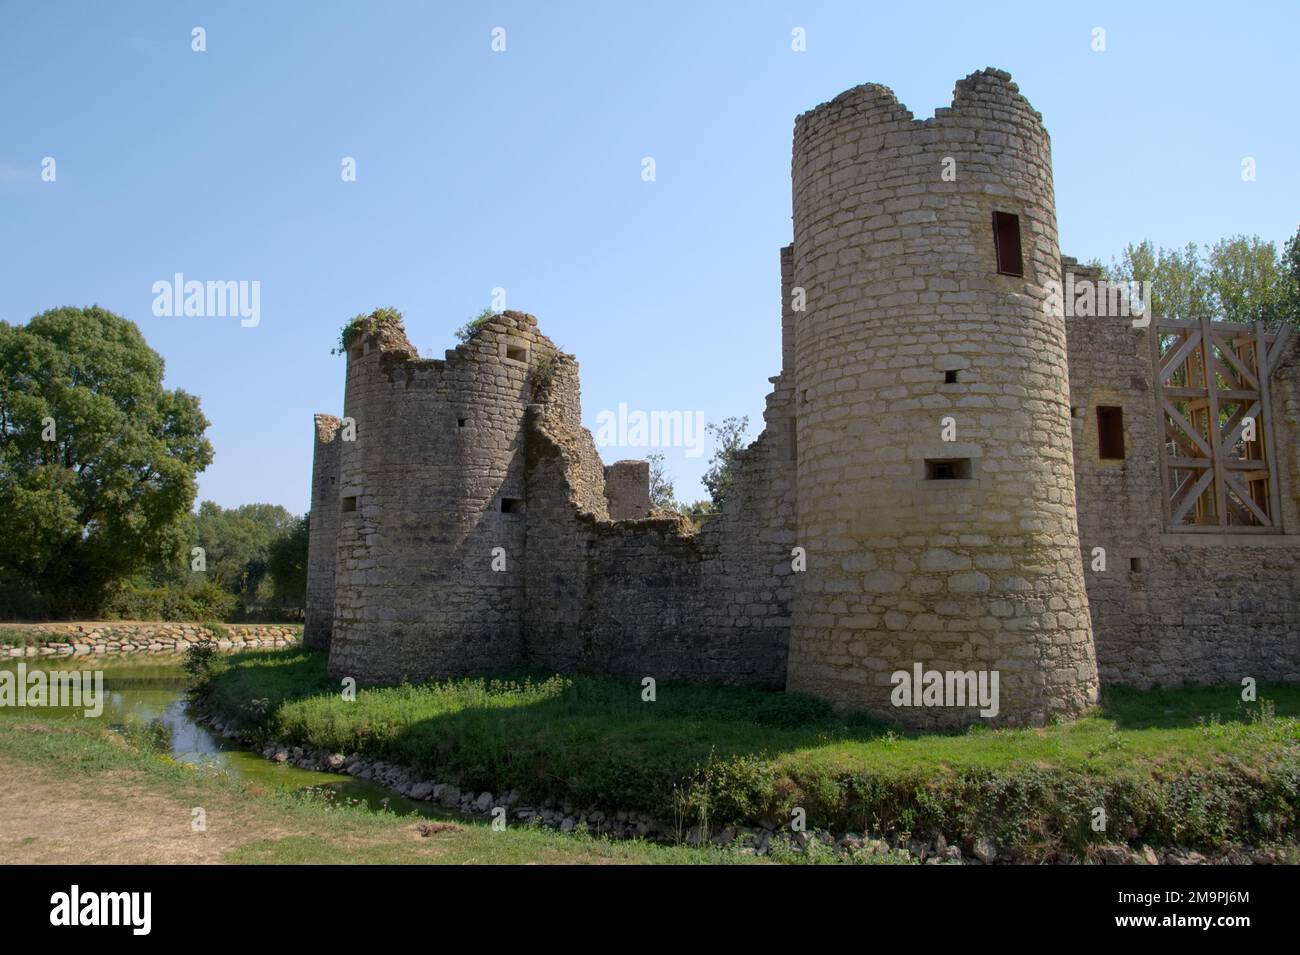 Chateau de Commequiers (Commequiers castle) in Summer, Vendee, France Stock Photo